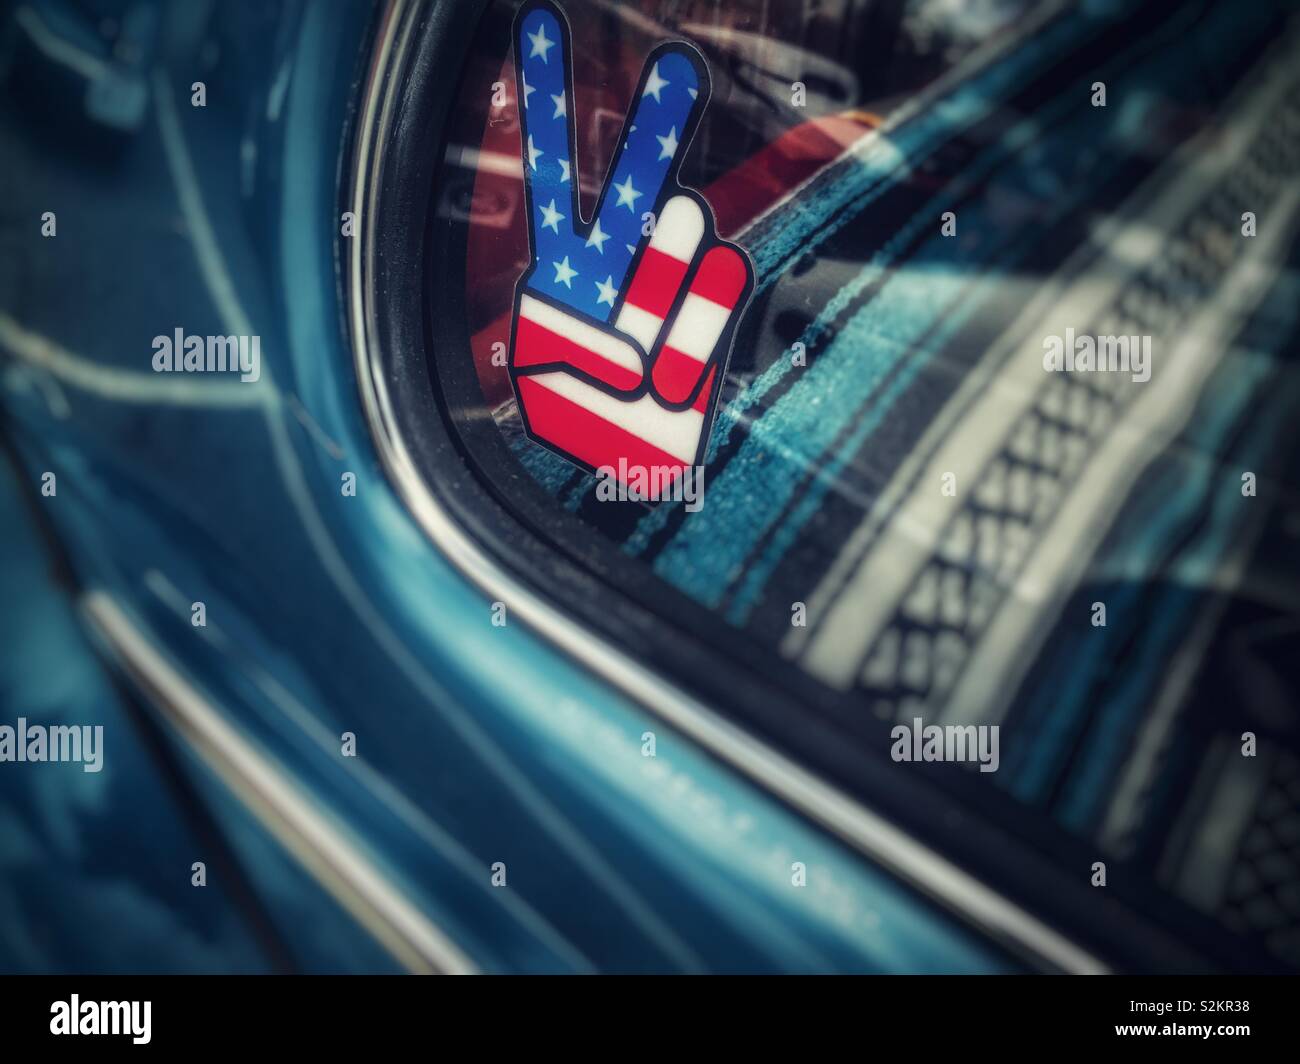 Patriotic peace symbol sticker on the window of a vintage Volkswagen Beetle Stock Photo